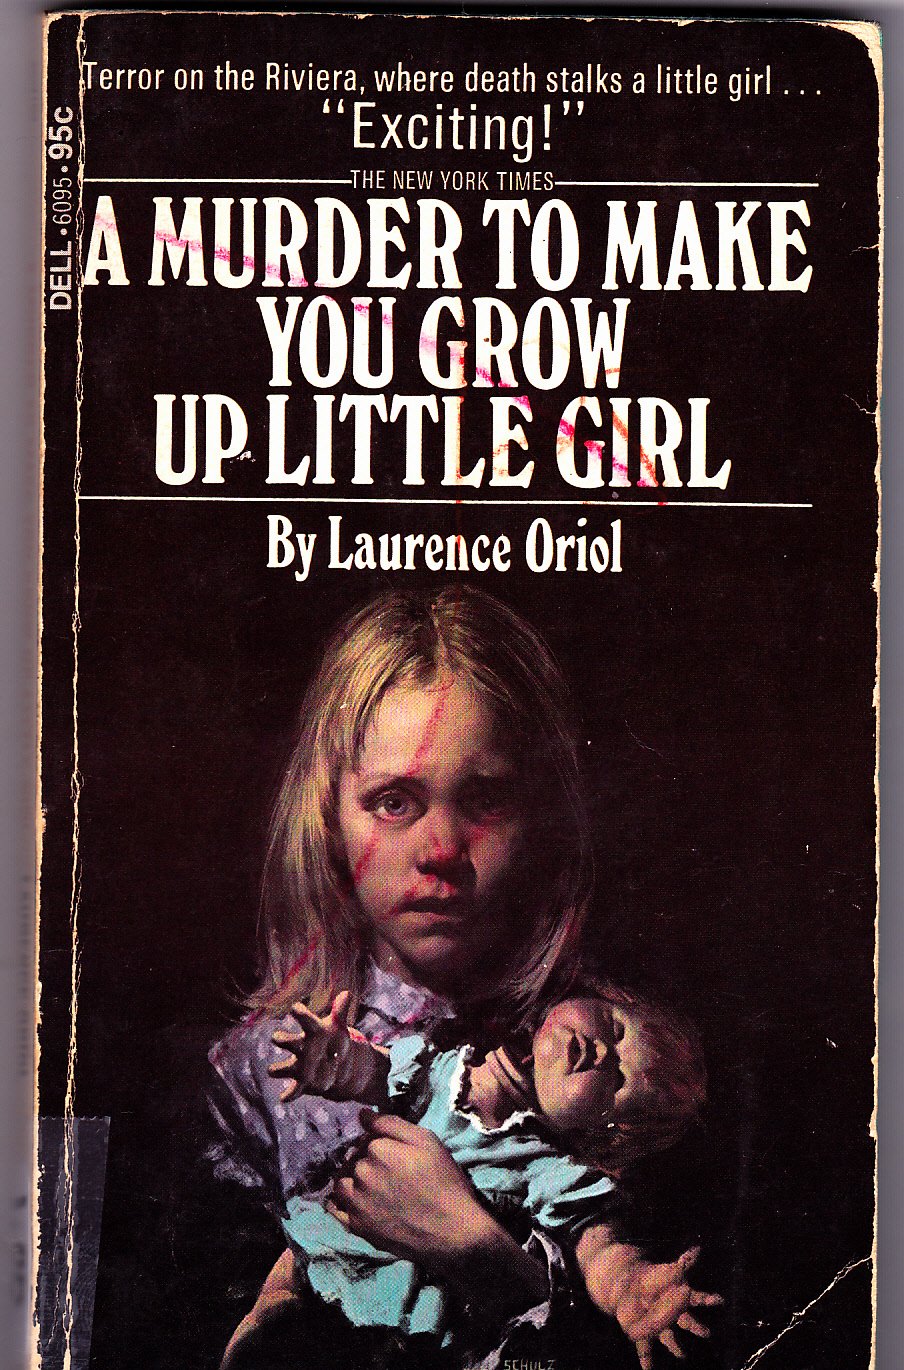 A Murder To Make You Grow Up Little Girl by Laurence Oriol 1973 Paperback Book - Good